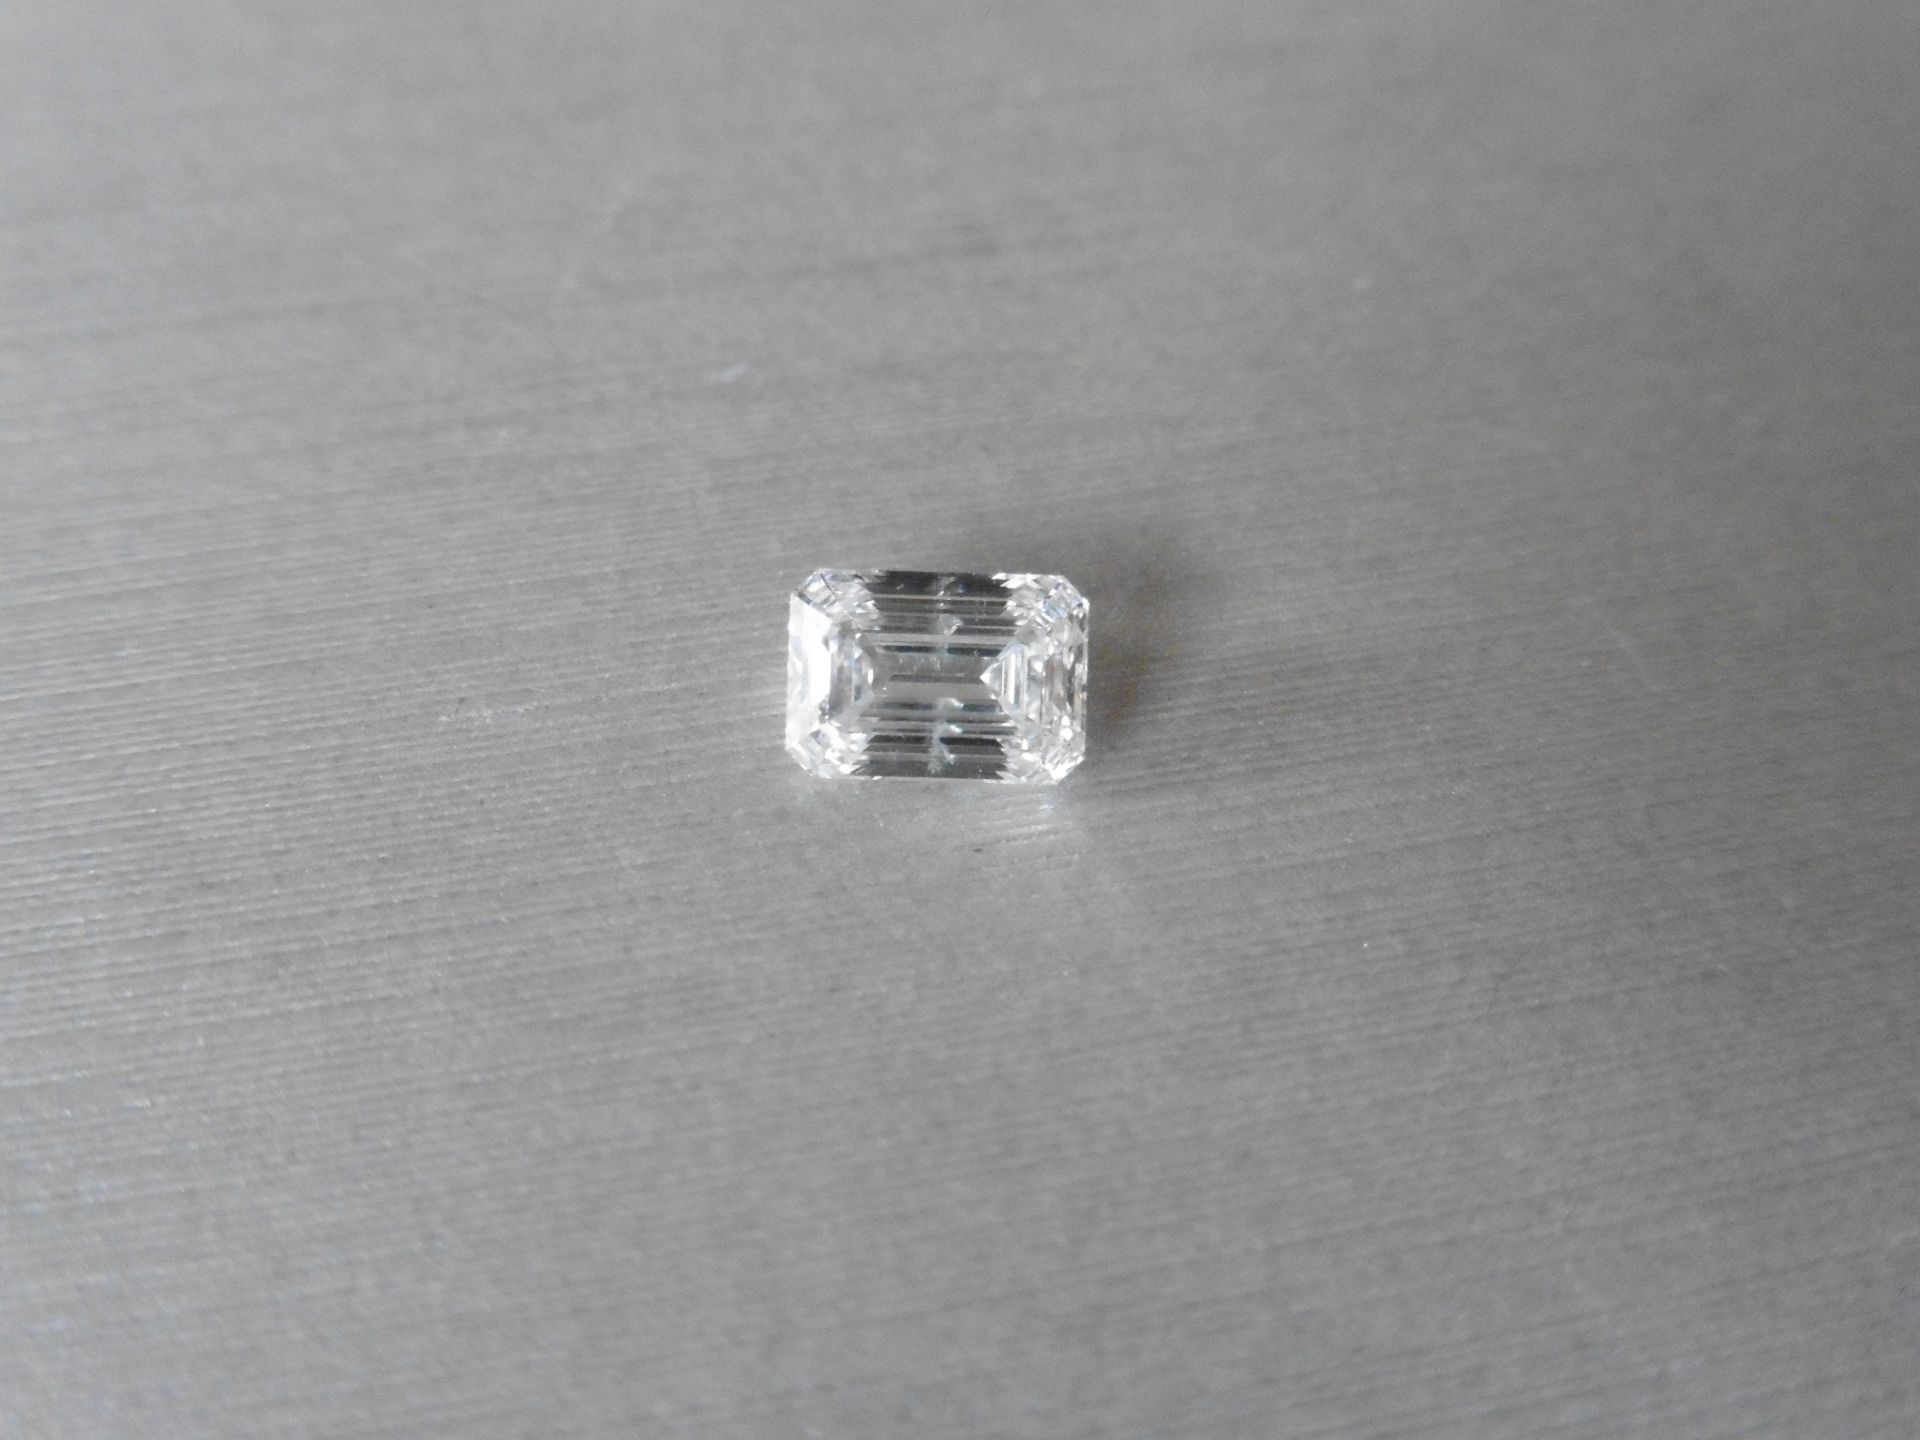 1.50ct single emerald cut diamond. Measures 7.67 x 5.41 x 3.53mm. F colour SI2 clarity. Valued at £